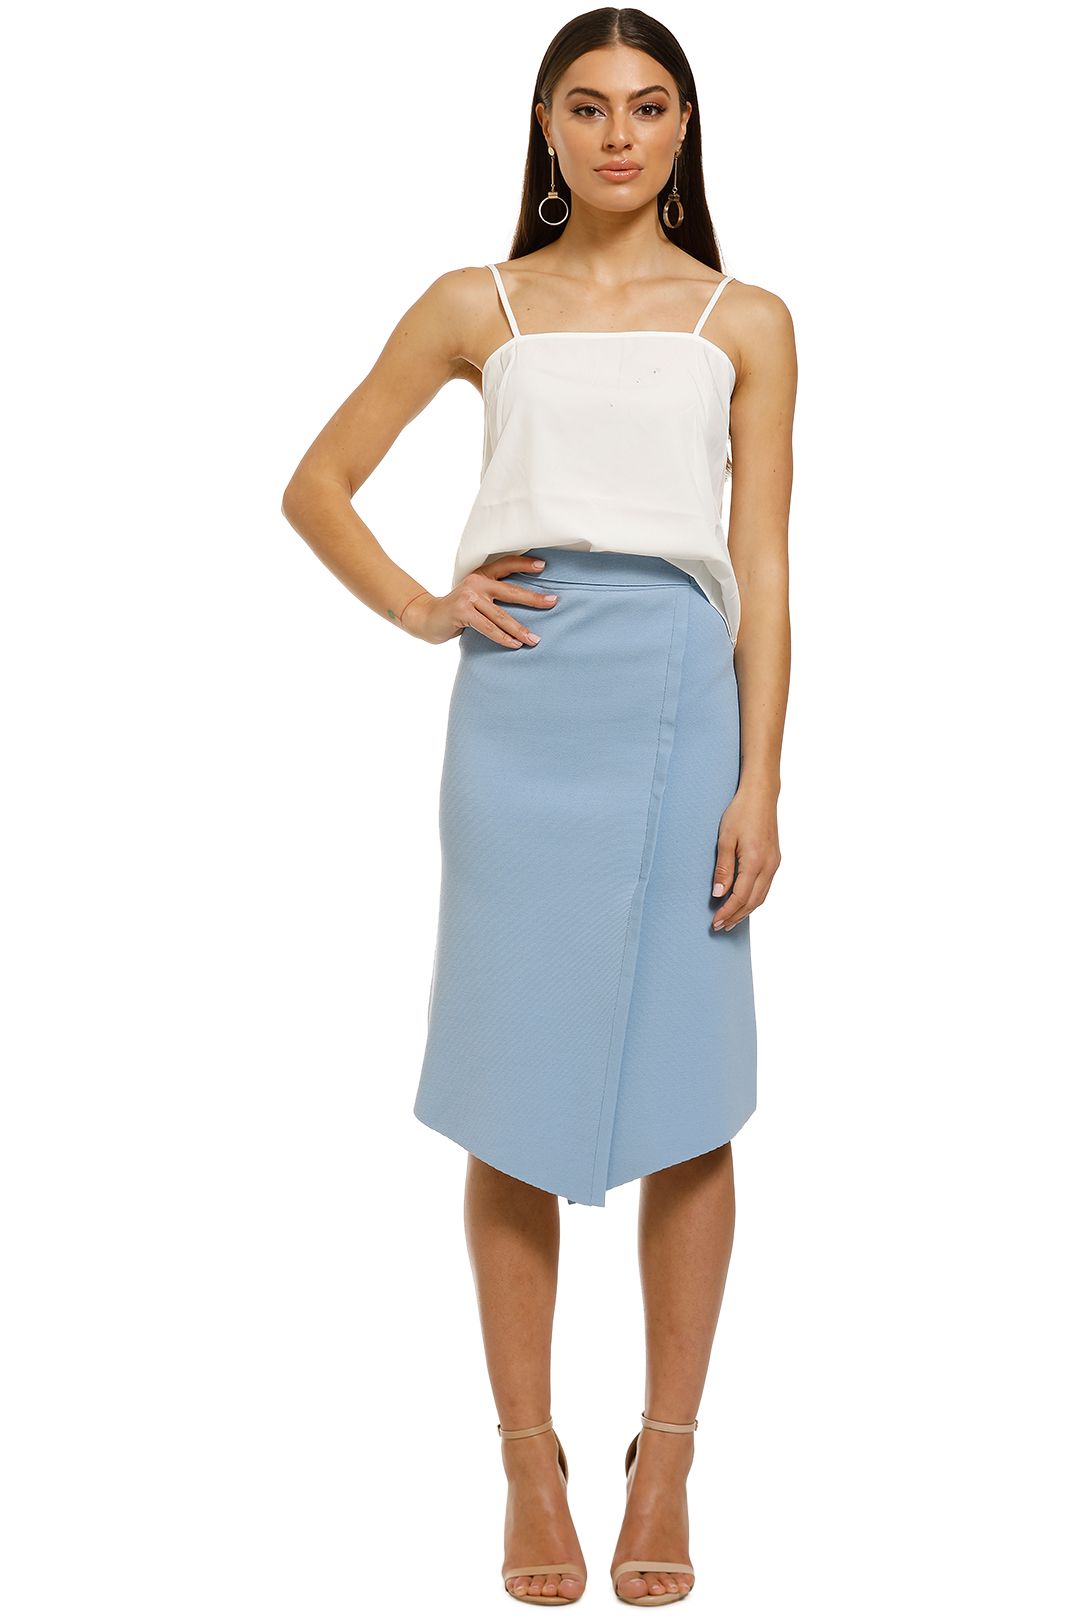 FWRD-The-Label-Alena-Crepe-Knit-Skirt-Opal-Front